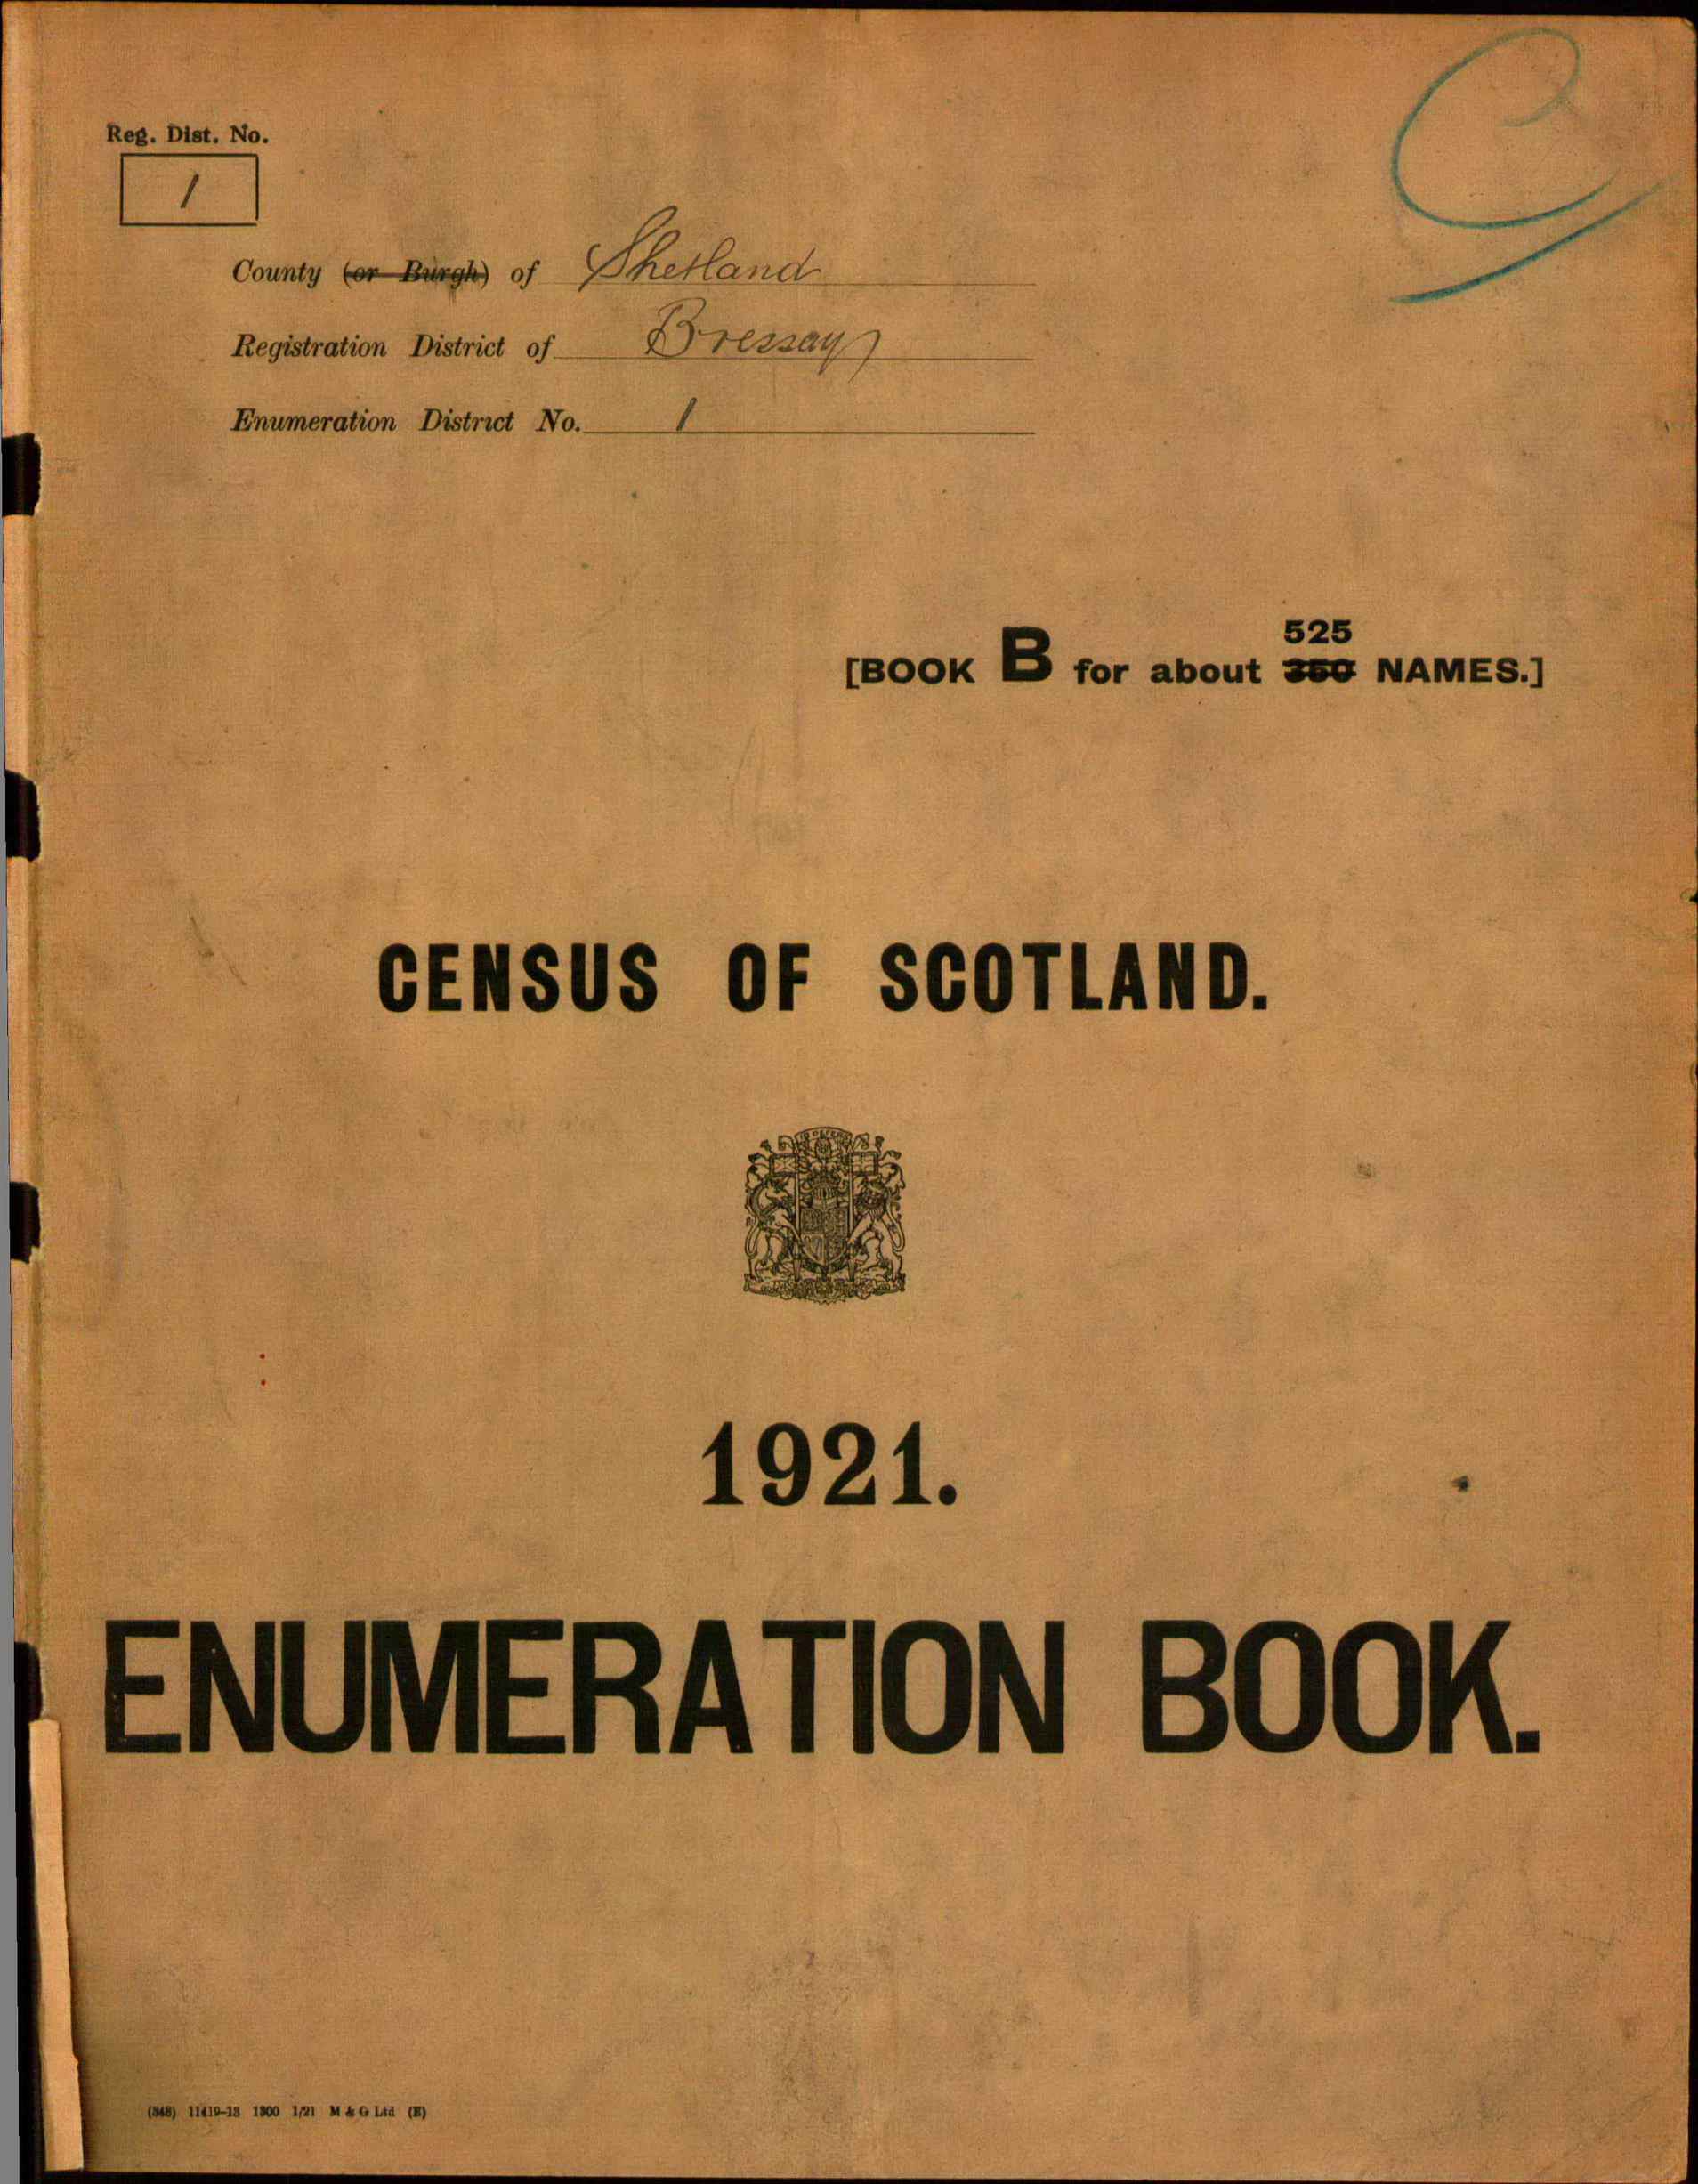 Image of a 1921 census enumeration book cover